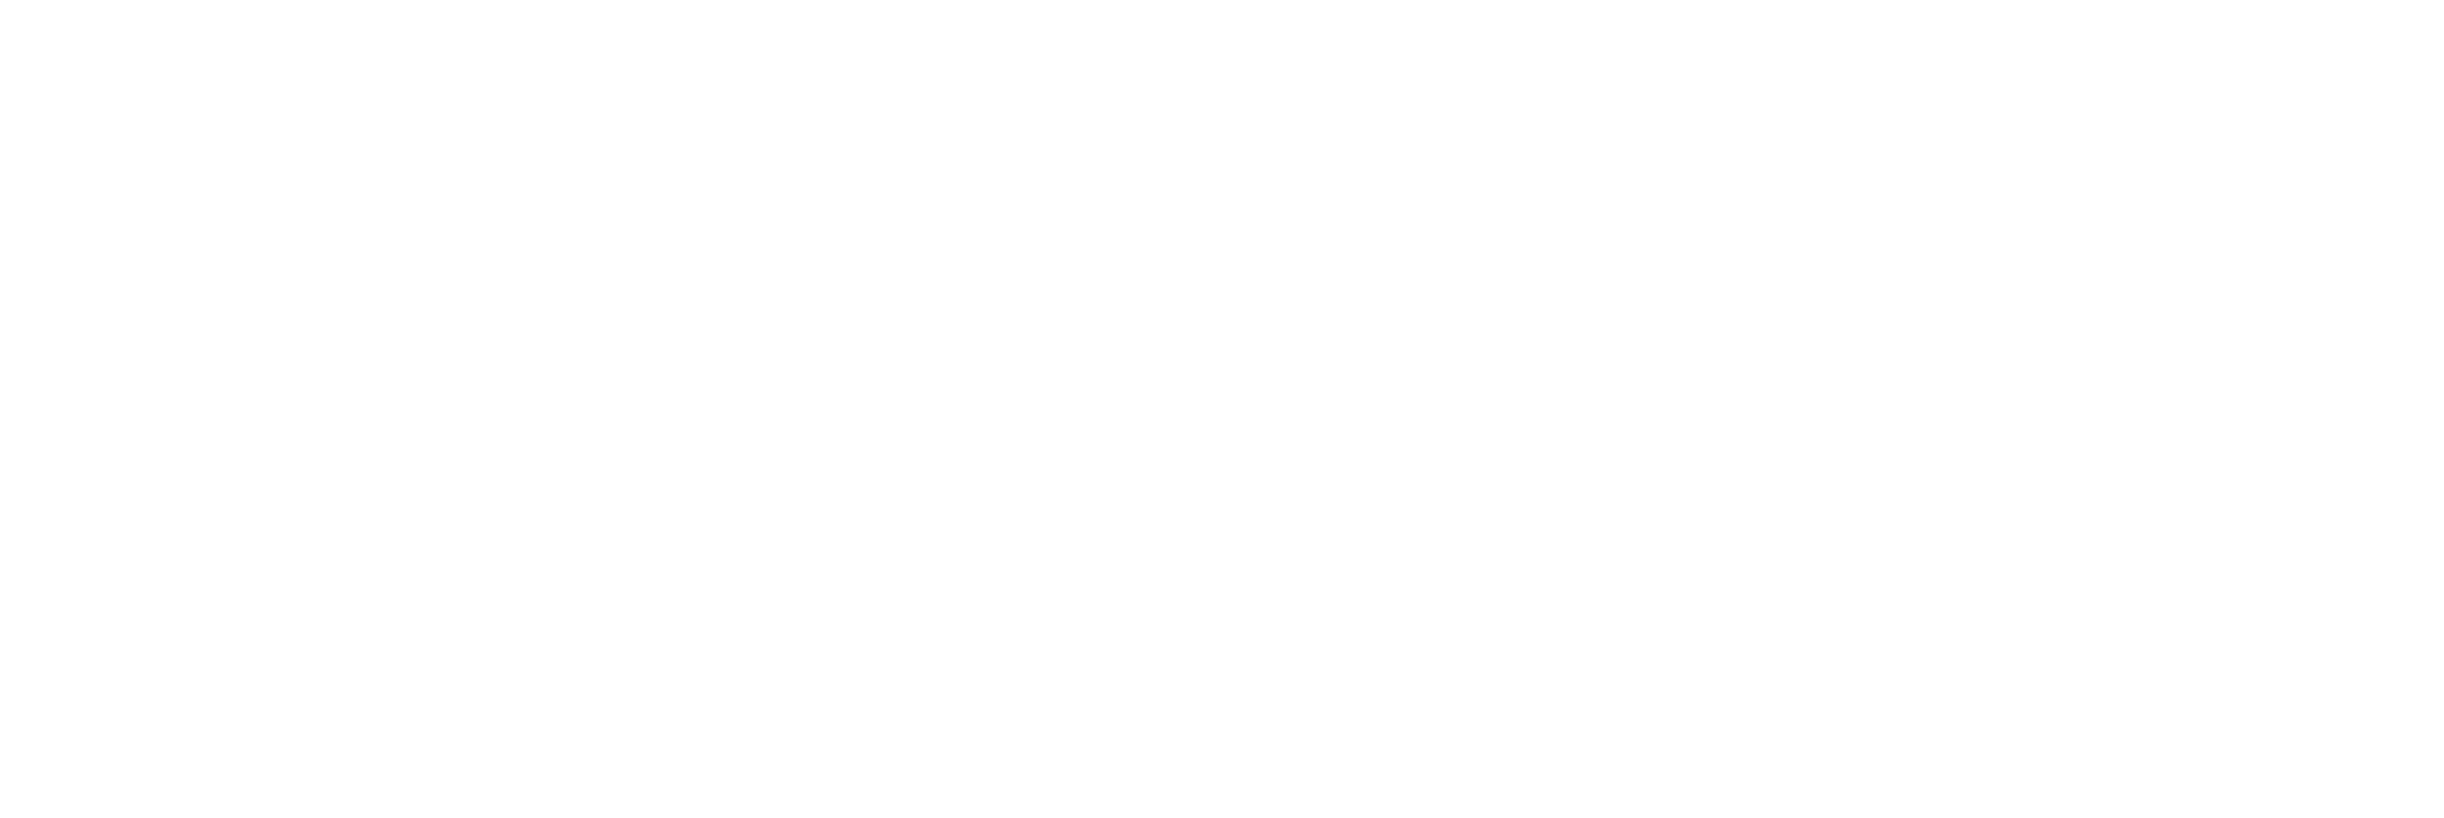 Lilys Cocoon